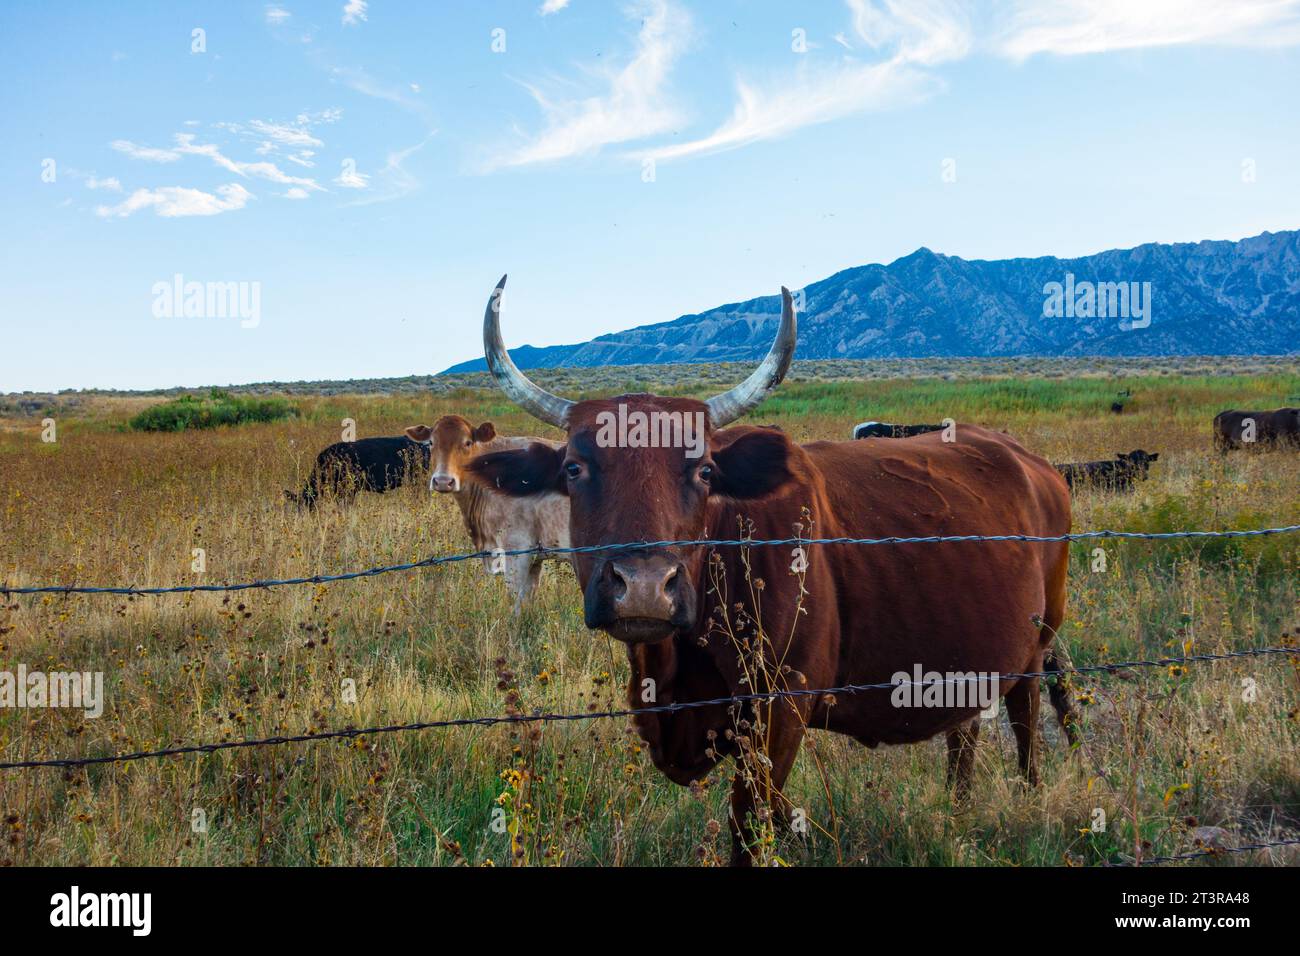 Cows, one with long horns, looking at the camera in the eastern sierra nevada mountains in Lone Pine, California Stock Photo